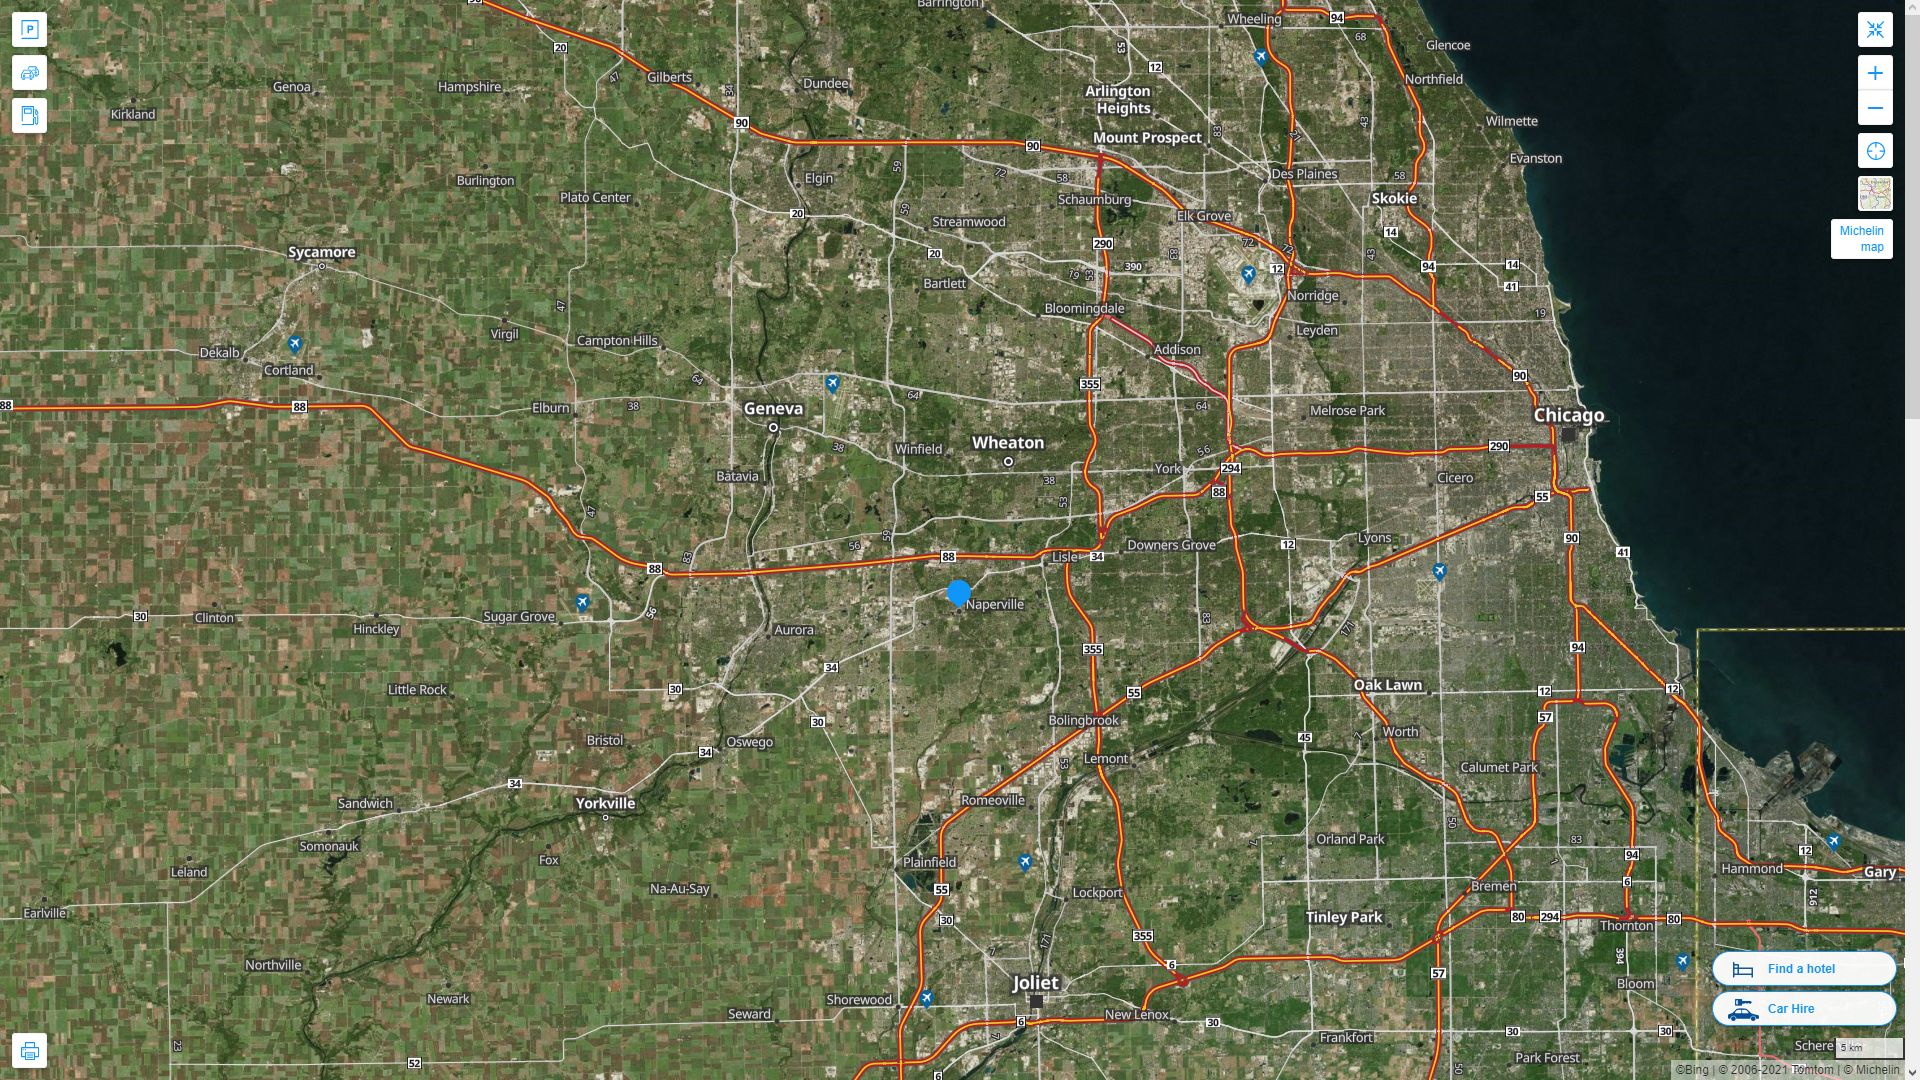 Naperville illinois Highway and Road Map with Satellite View